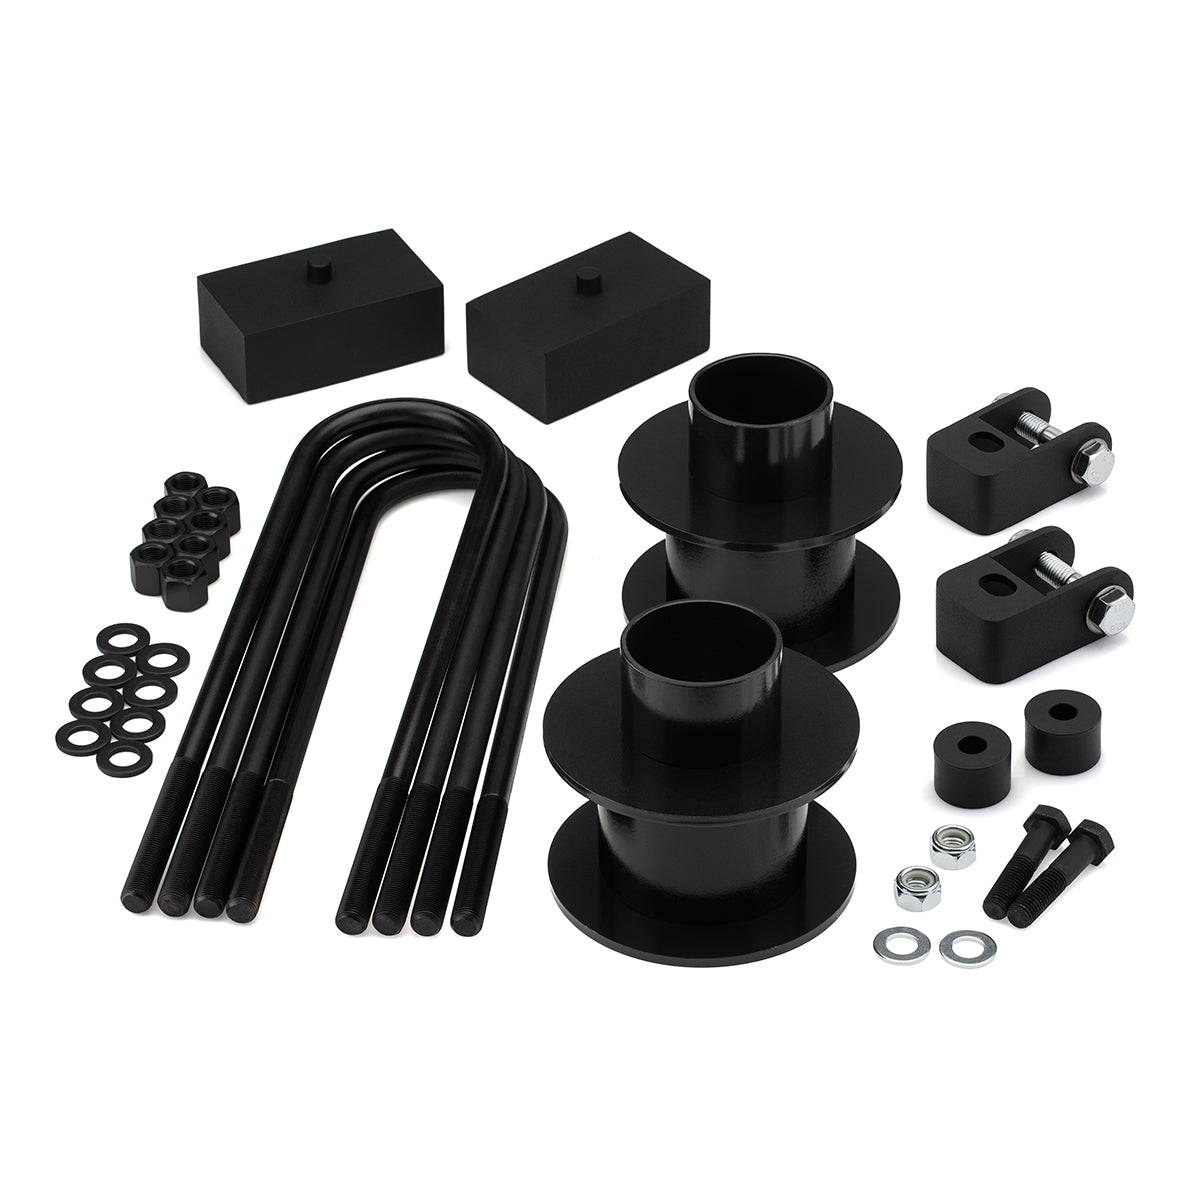 2005-2022 Ford F-350 Full Lift Kit with Bump Stop Drop and Front Shock Extenders